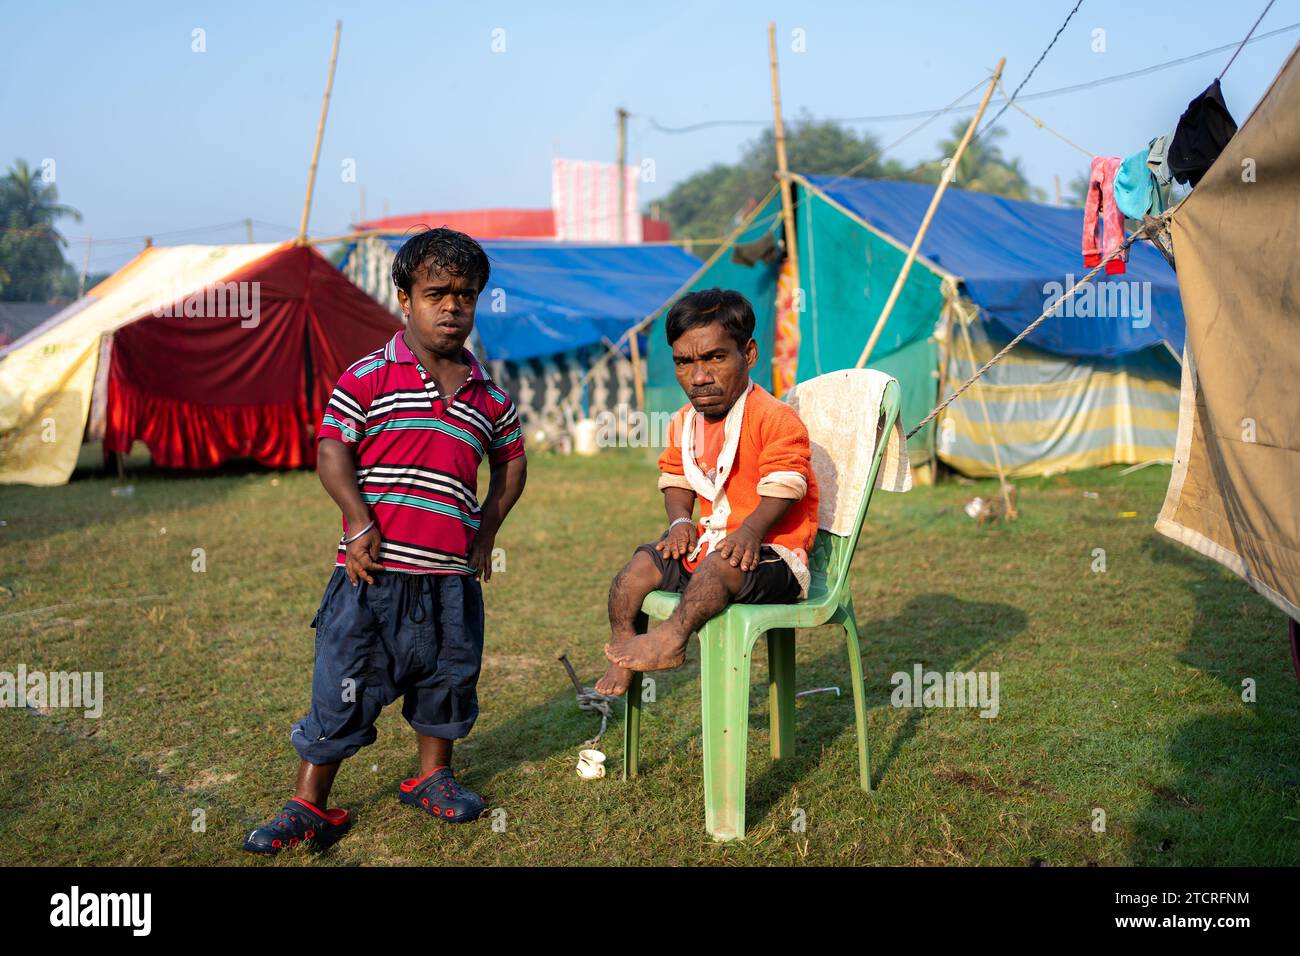 Two dwarf men, who play the role of joker in a circus, are seen in front of their tents in a ground where they live during winter season. Winter and childhood meant a time when there was a distinct attraction and love for the circus. But now the times have changed so the demand has also decreased especially after the show of any kind of animals in the circus has stopped, the owners of the circus teams are more upset. Now the game is shown only with jokers or people. And as a result the income has decreased. Now even the little ones have lost interest in the circus. As a result, the income of t Stock Photo